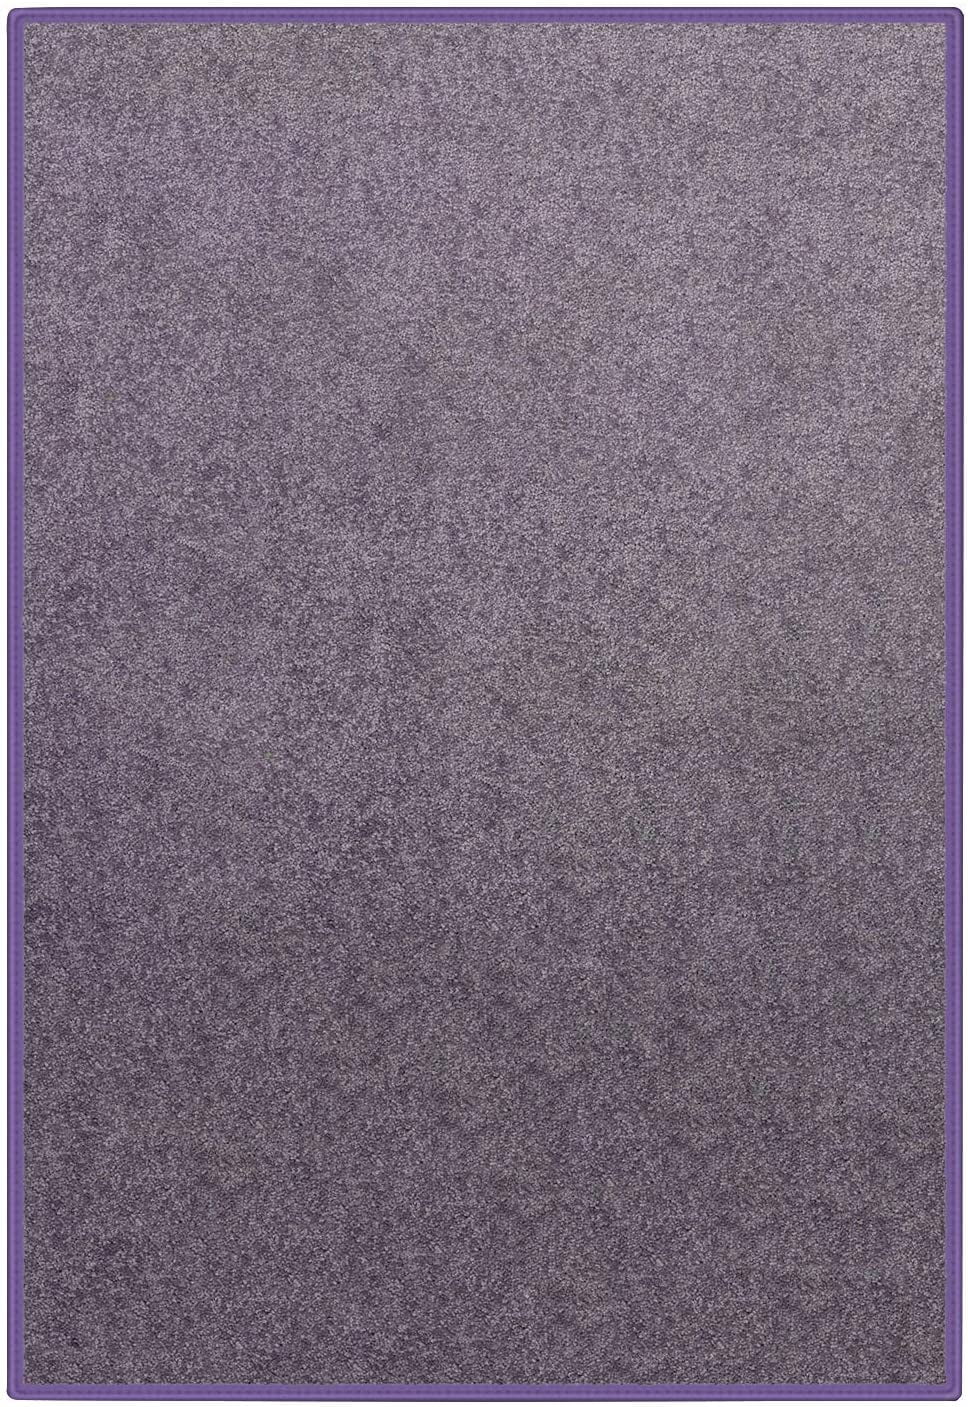 Details about   Violet Crush 30 oz Durable Cut Pile Area Rug.Multiple sizes and shapes to chooce 